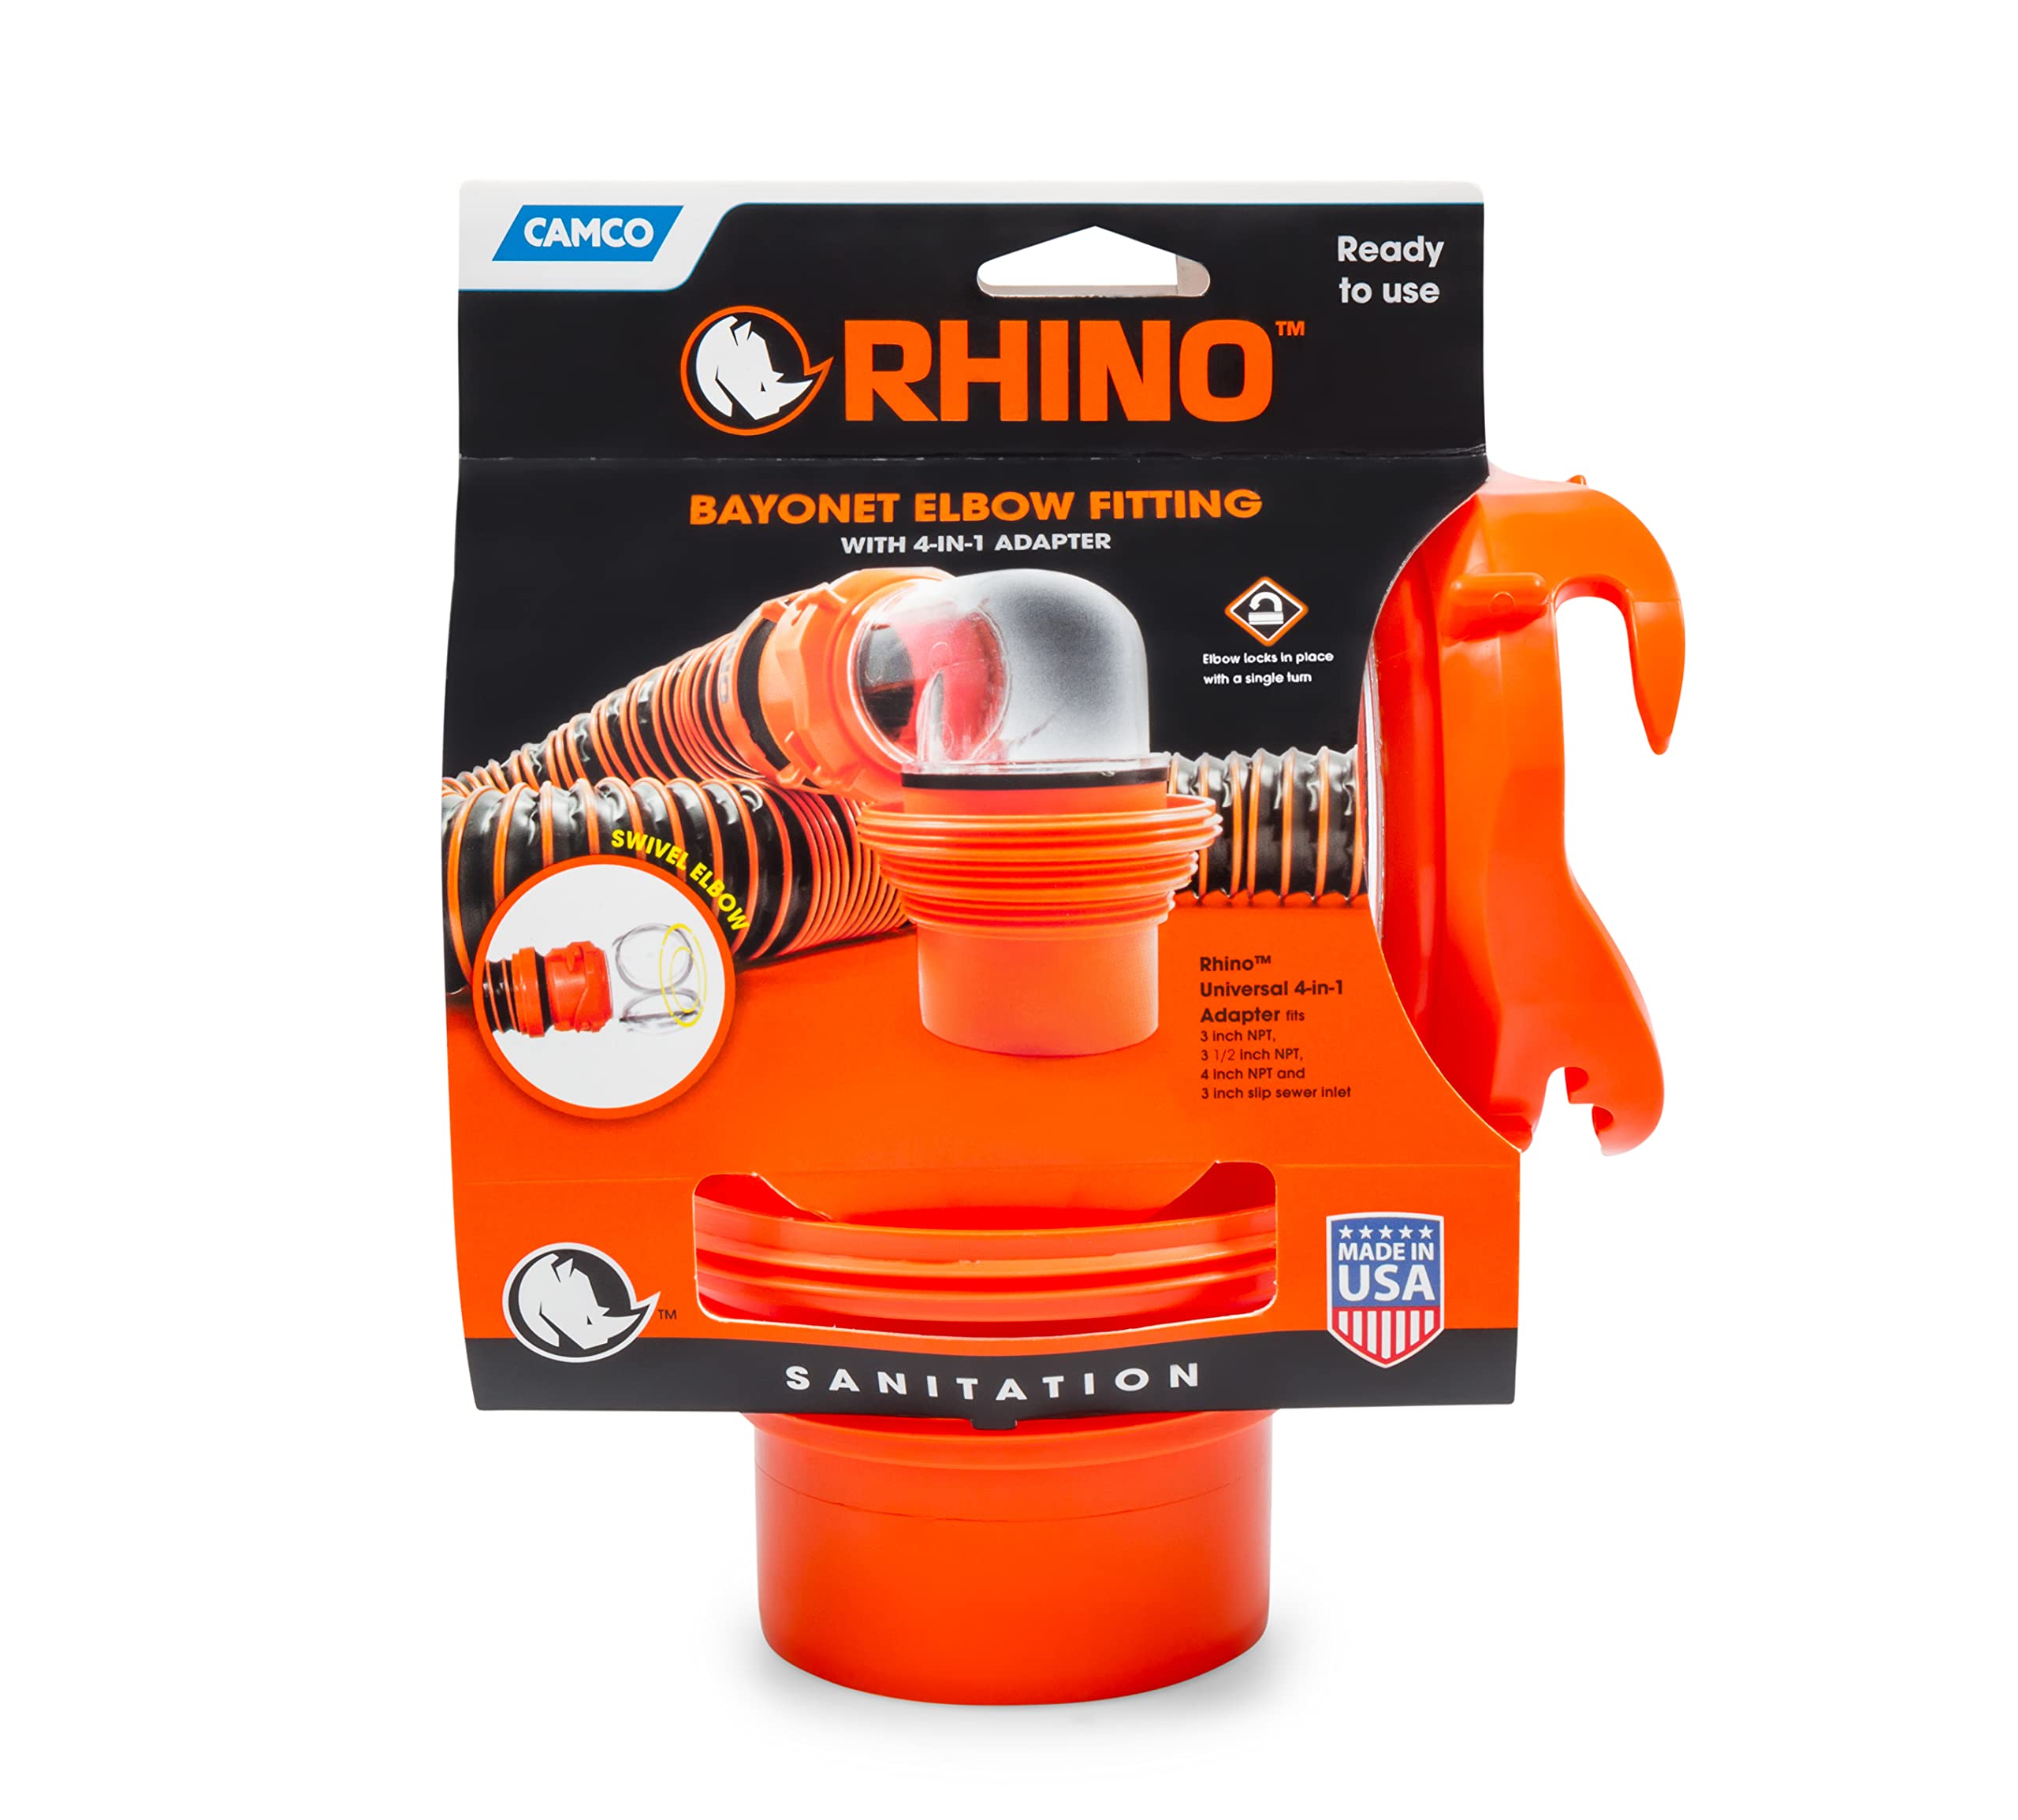 Camco RhinoFlex Clear RV Sewer Hose Elbow with 4-in-1 Adapter | Features a 360-Degree Fitting Rotation and Built-in Gasket for Odor-Tight Protection | Fits 4 Sizes of Dump Station Inlets (39736)